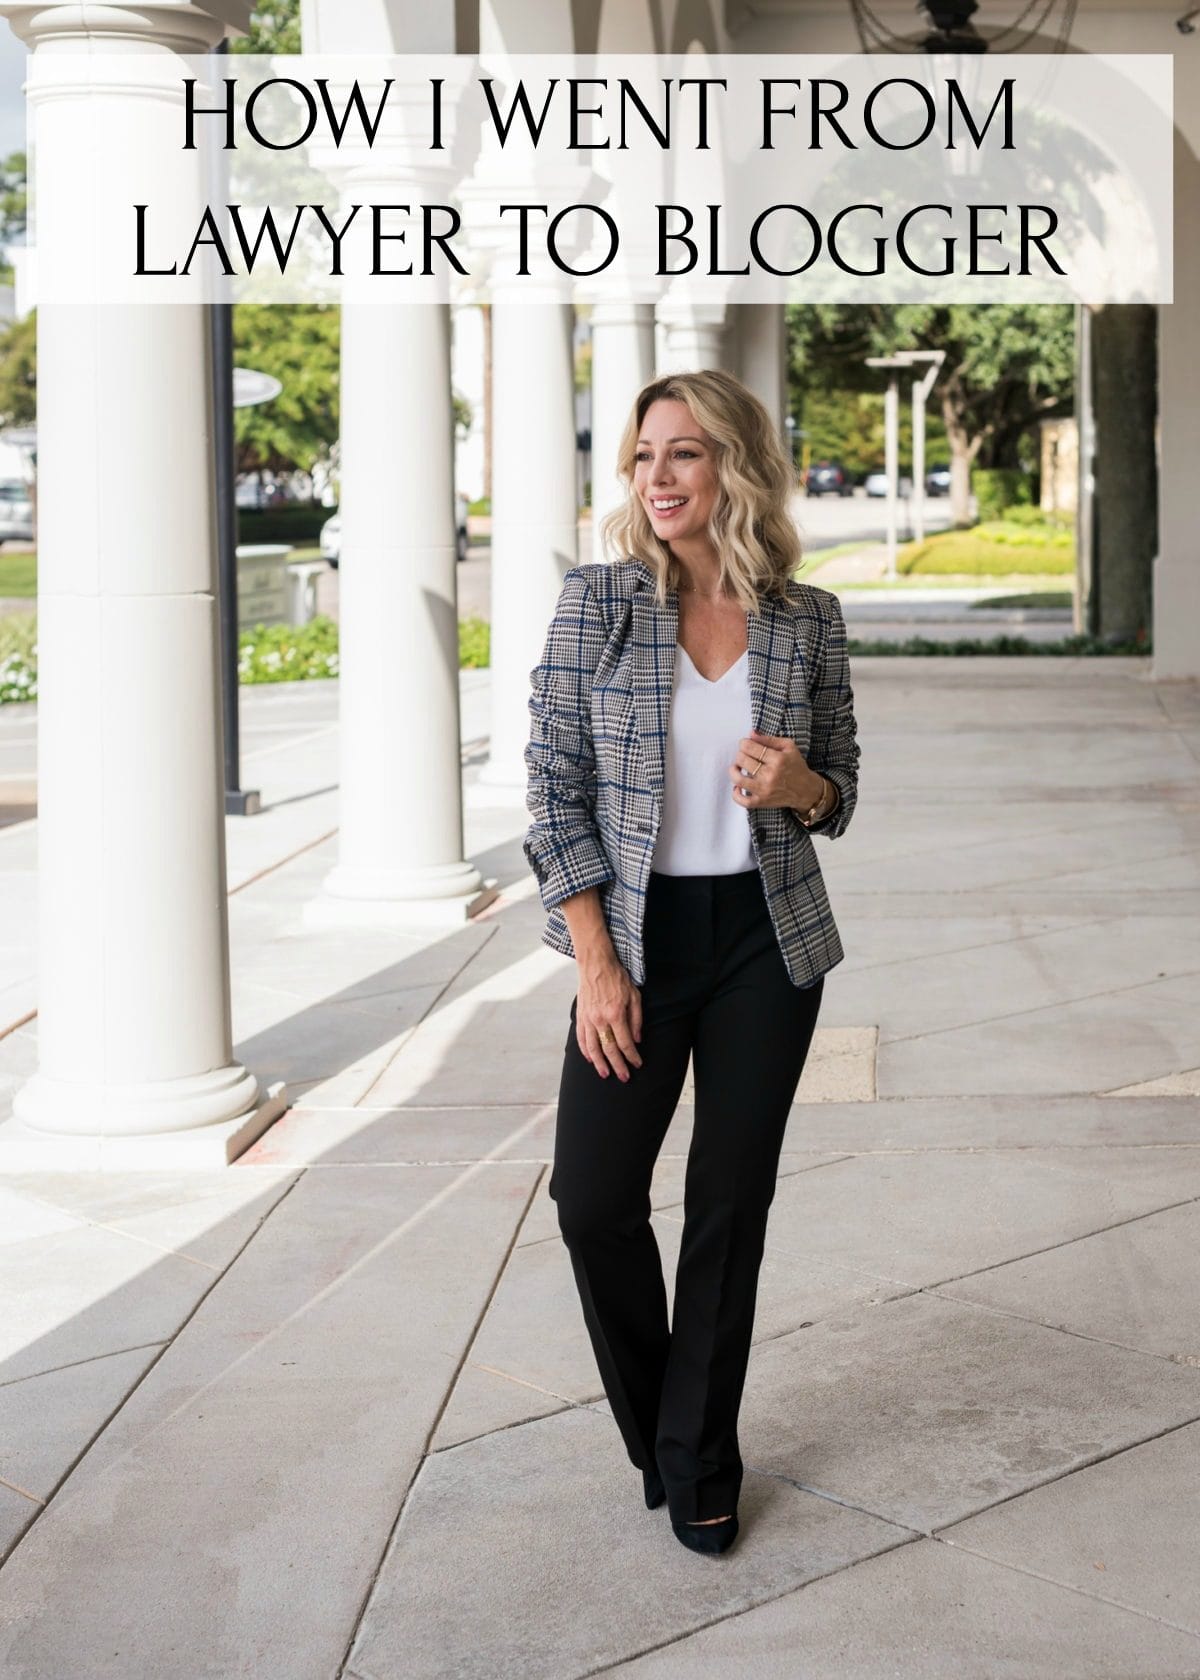 How to go from Lawyer to Blogger